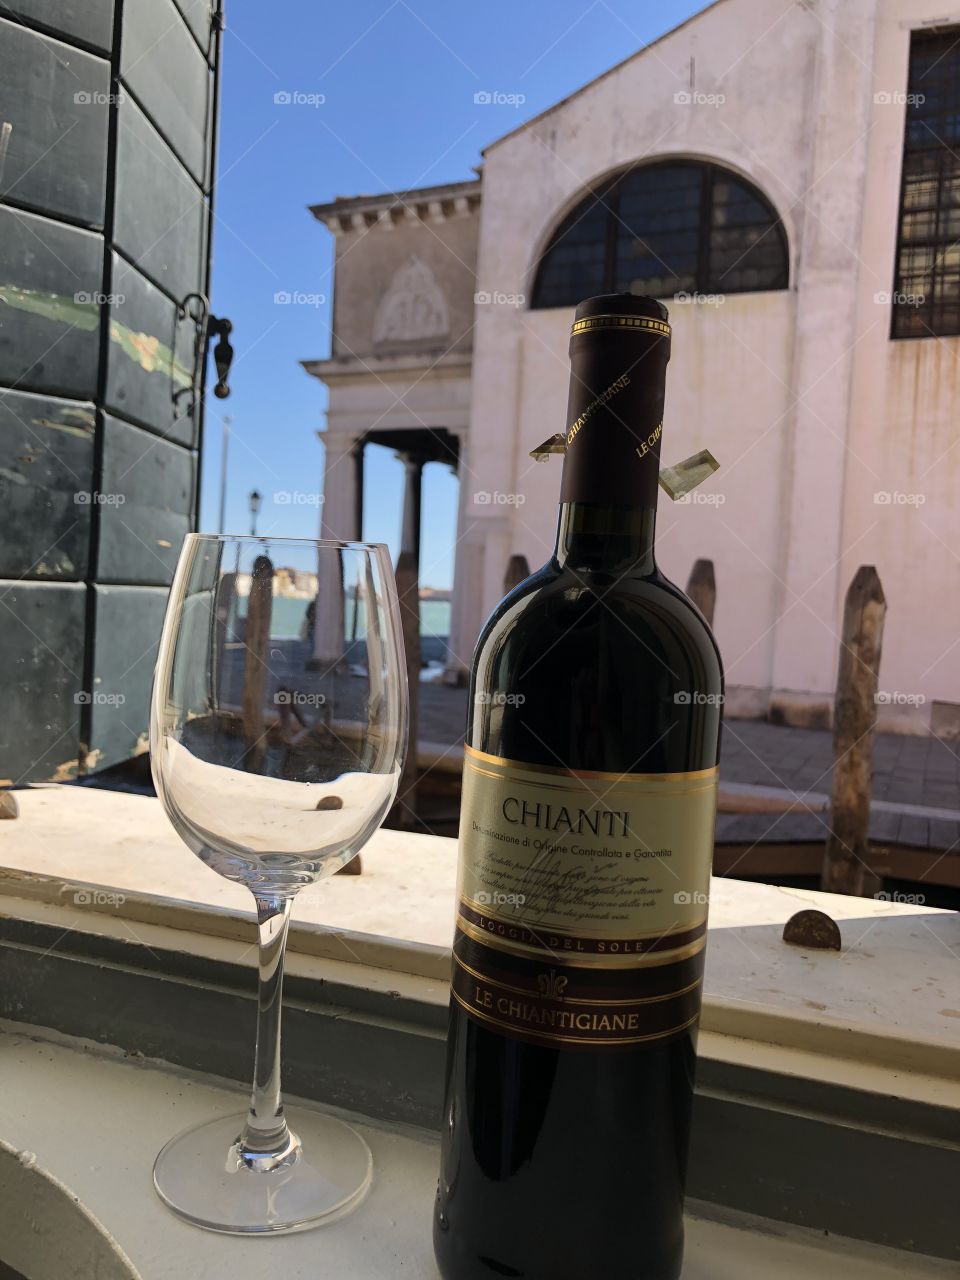 Wine at a Venetian window in Italy 2018